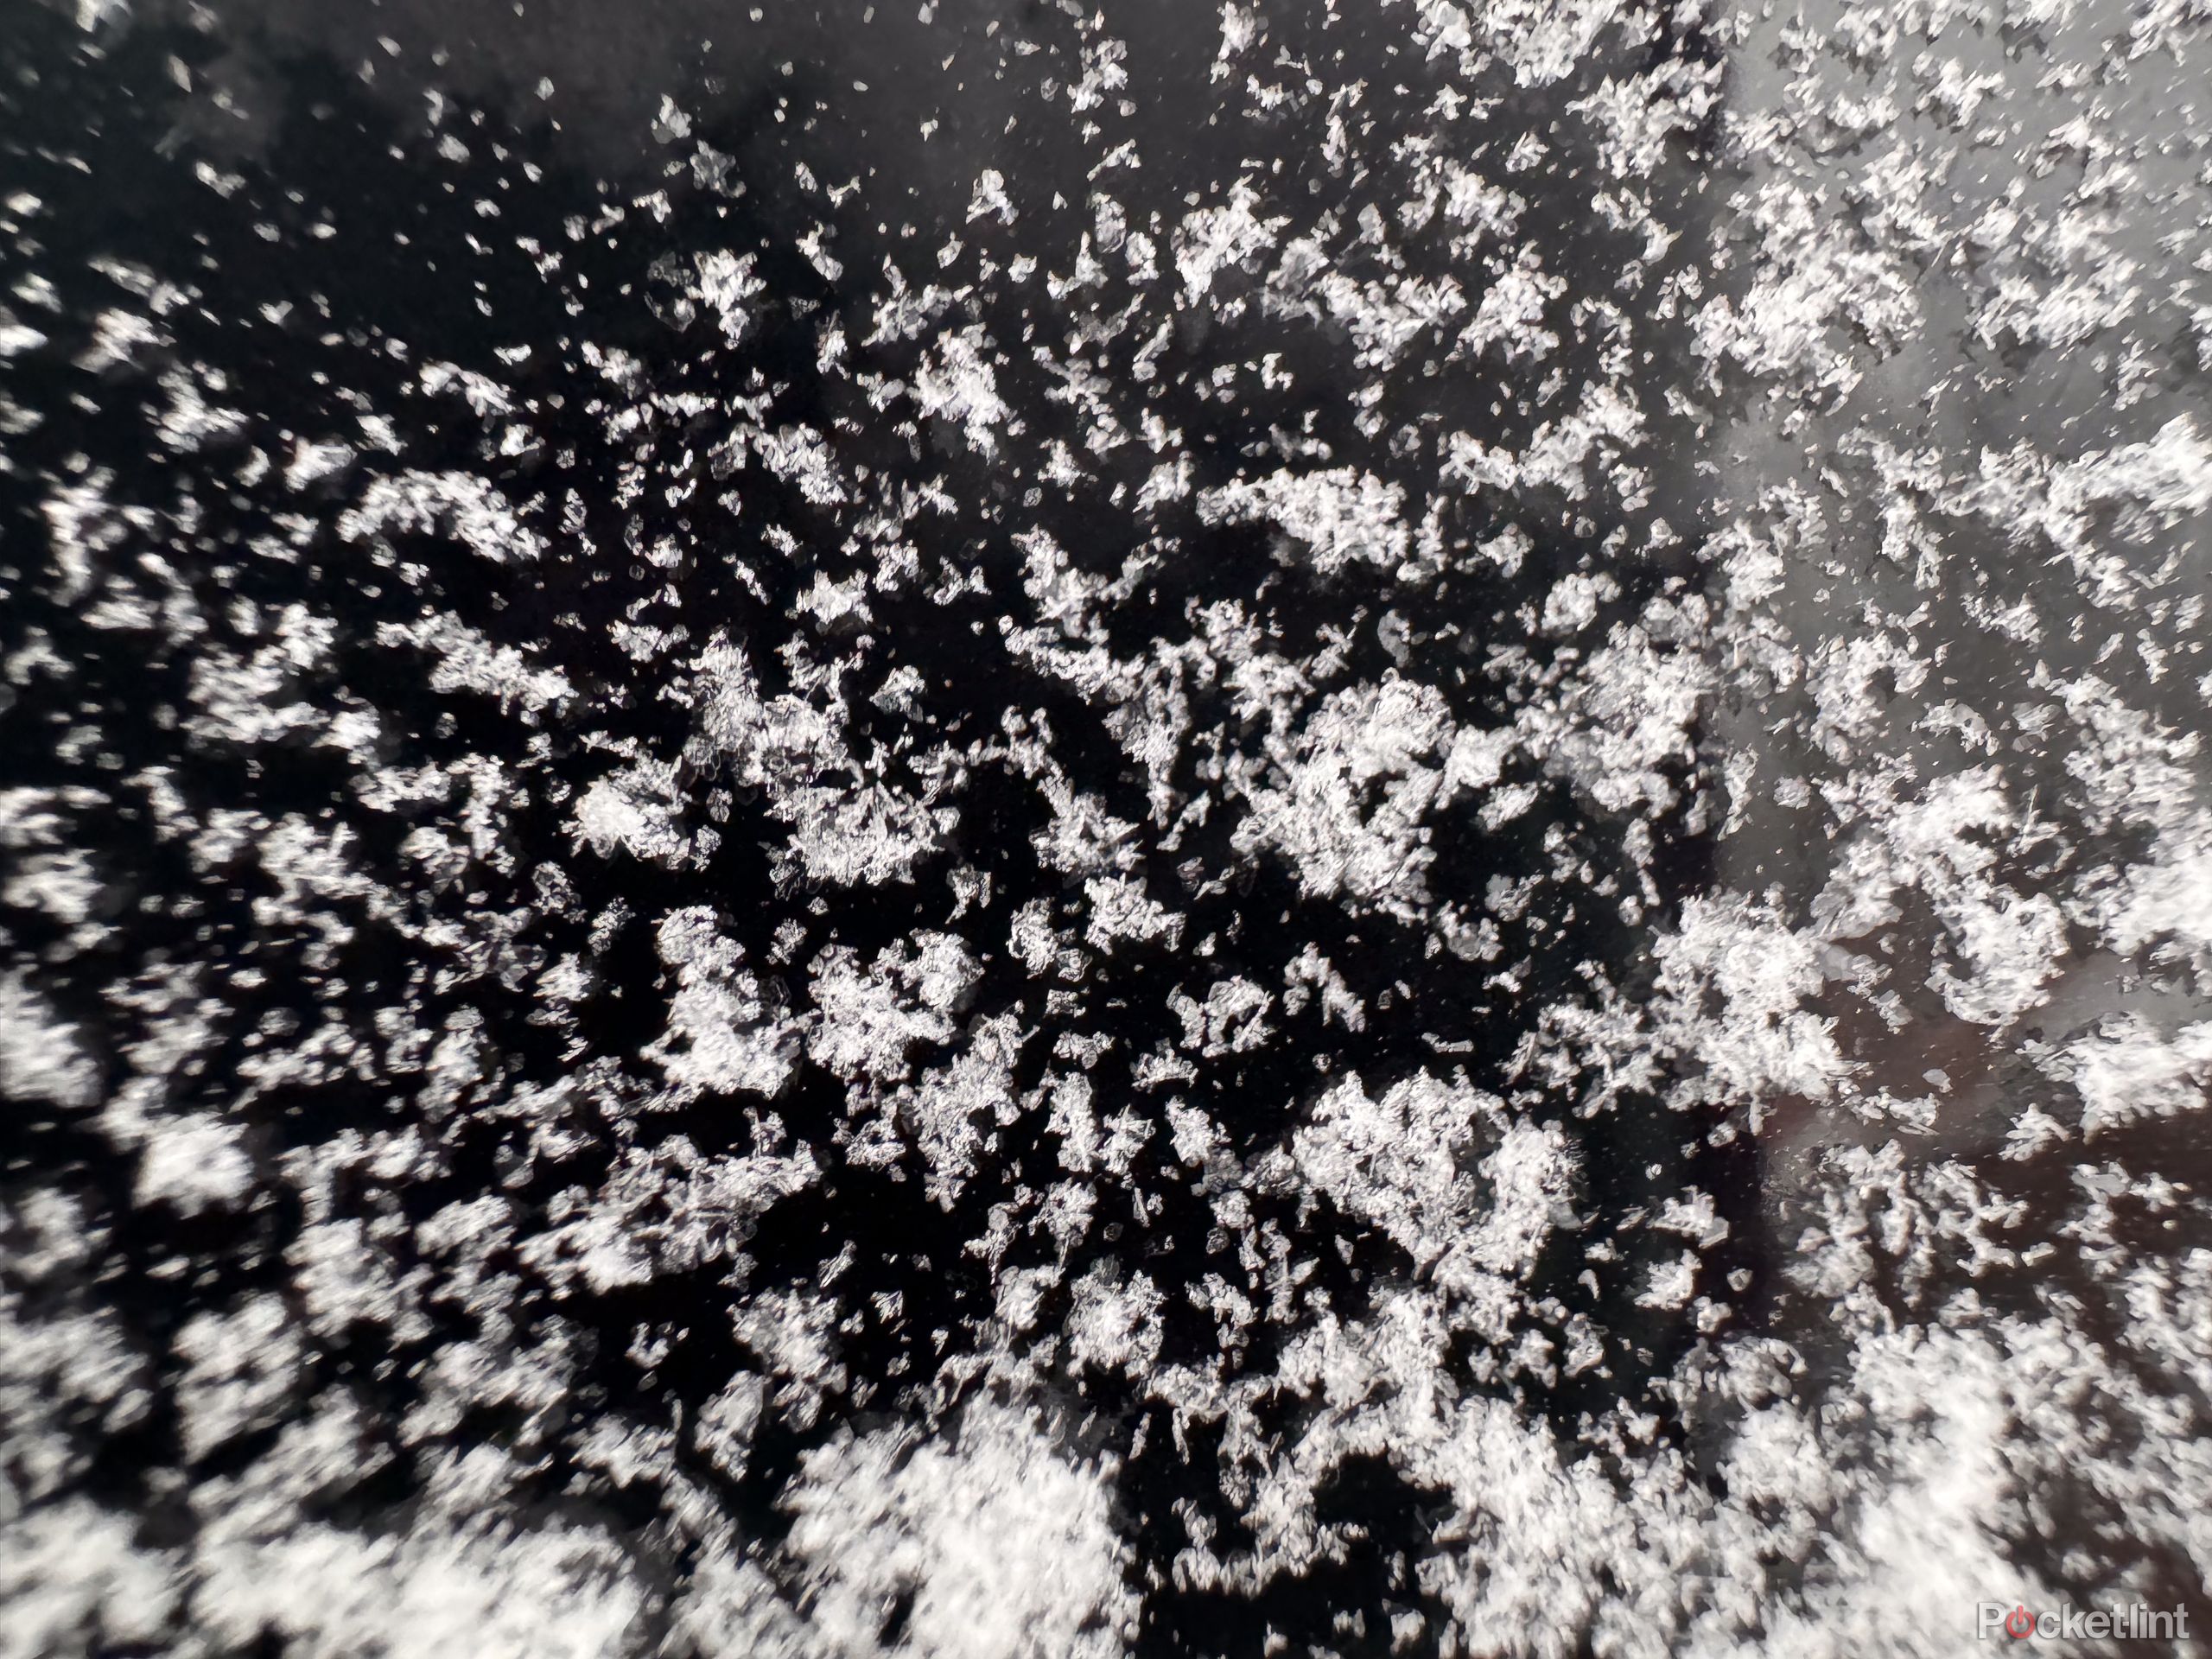 Snow on a black background, iPhone 15 Pro image sample